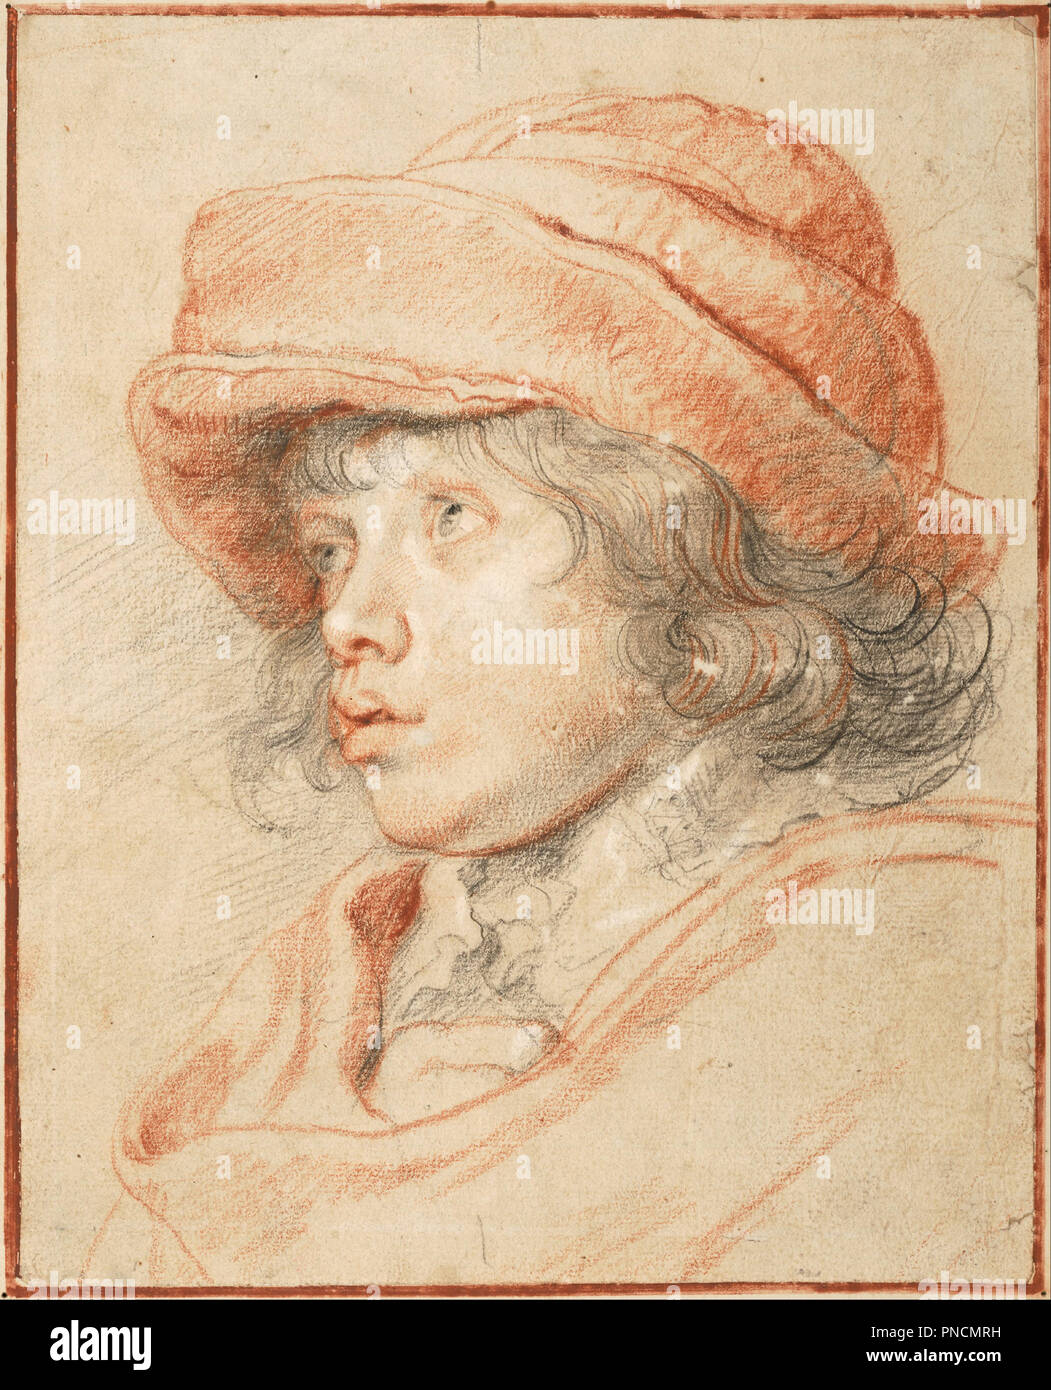 Rubens's Son Nicolaas Wearing a Red Felt Cap, 1625-1627. Date/Period: From 1625 until 1627. Drawing. White chalk, black chalk and sanguine on paper. Author: PETER PAUL RUBENS. RUBENS, PETER PAUL. Rubens, Pieter Paul. Stock Photo